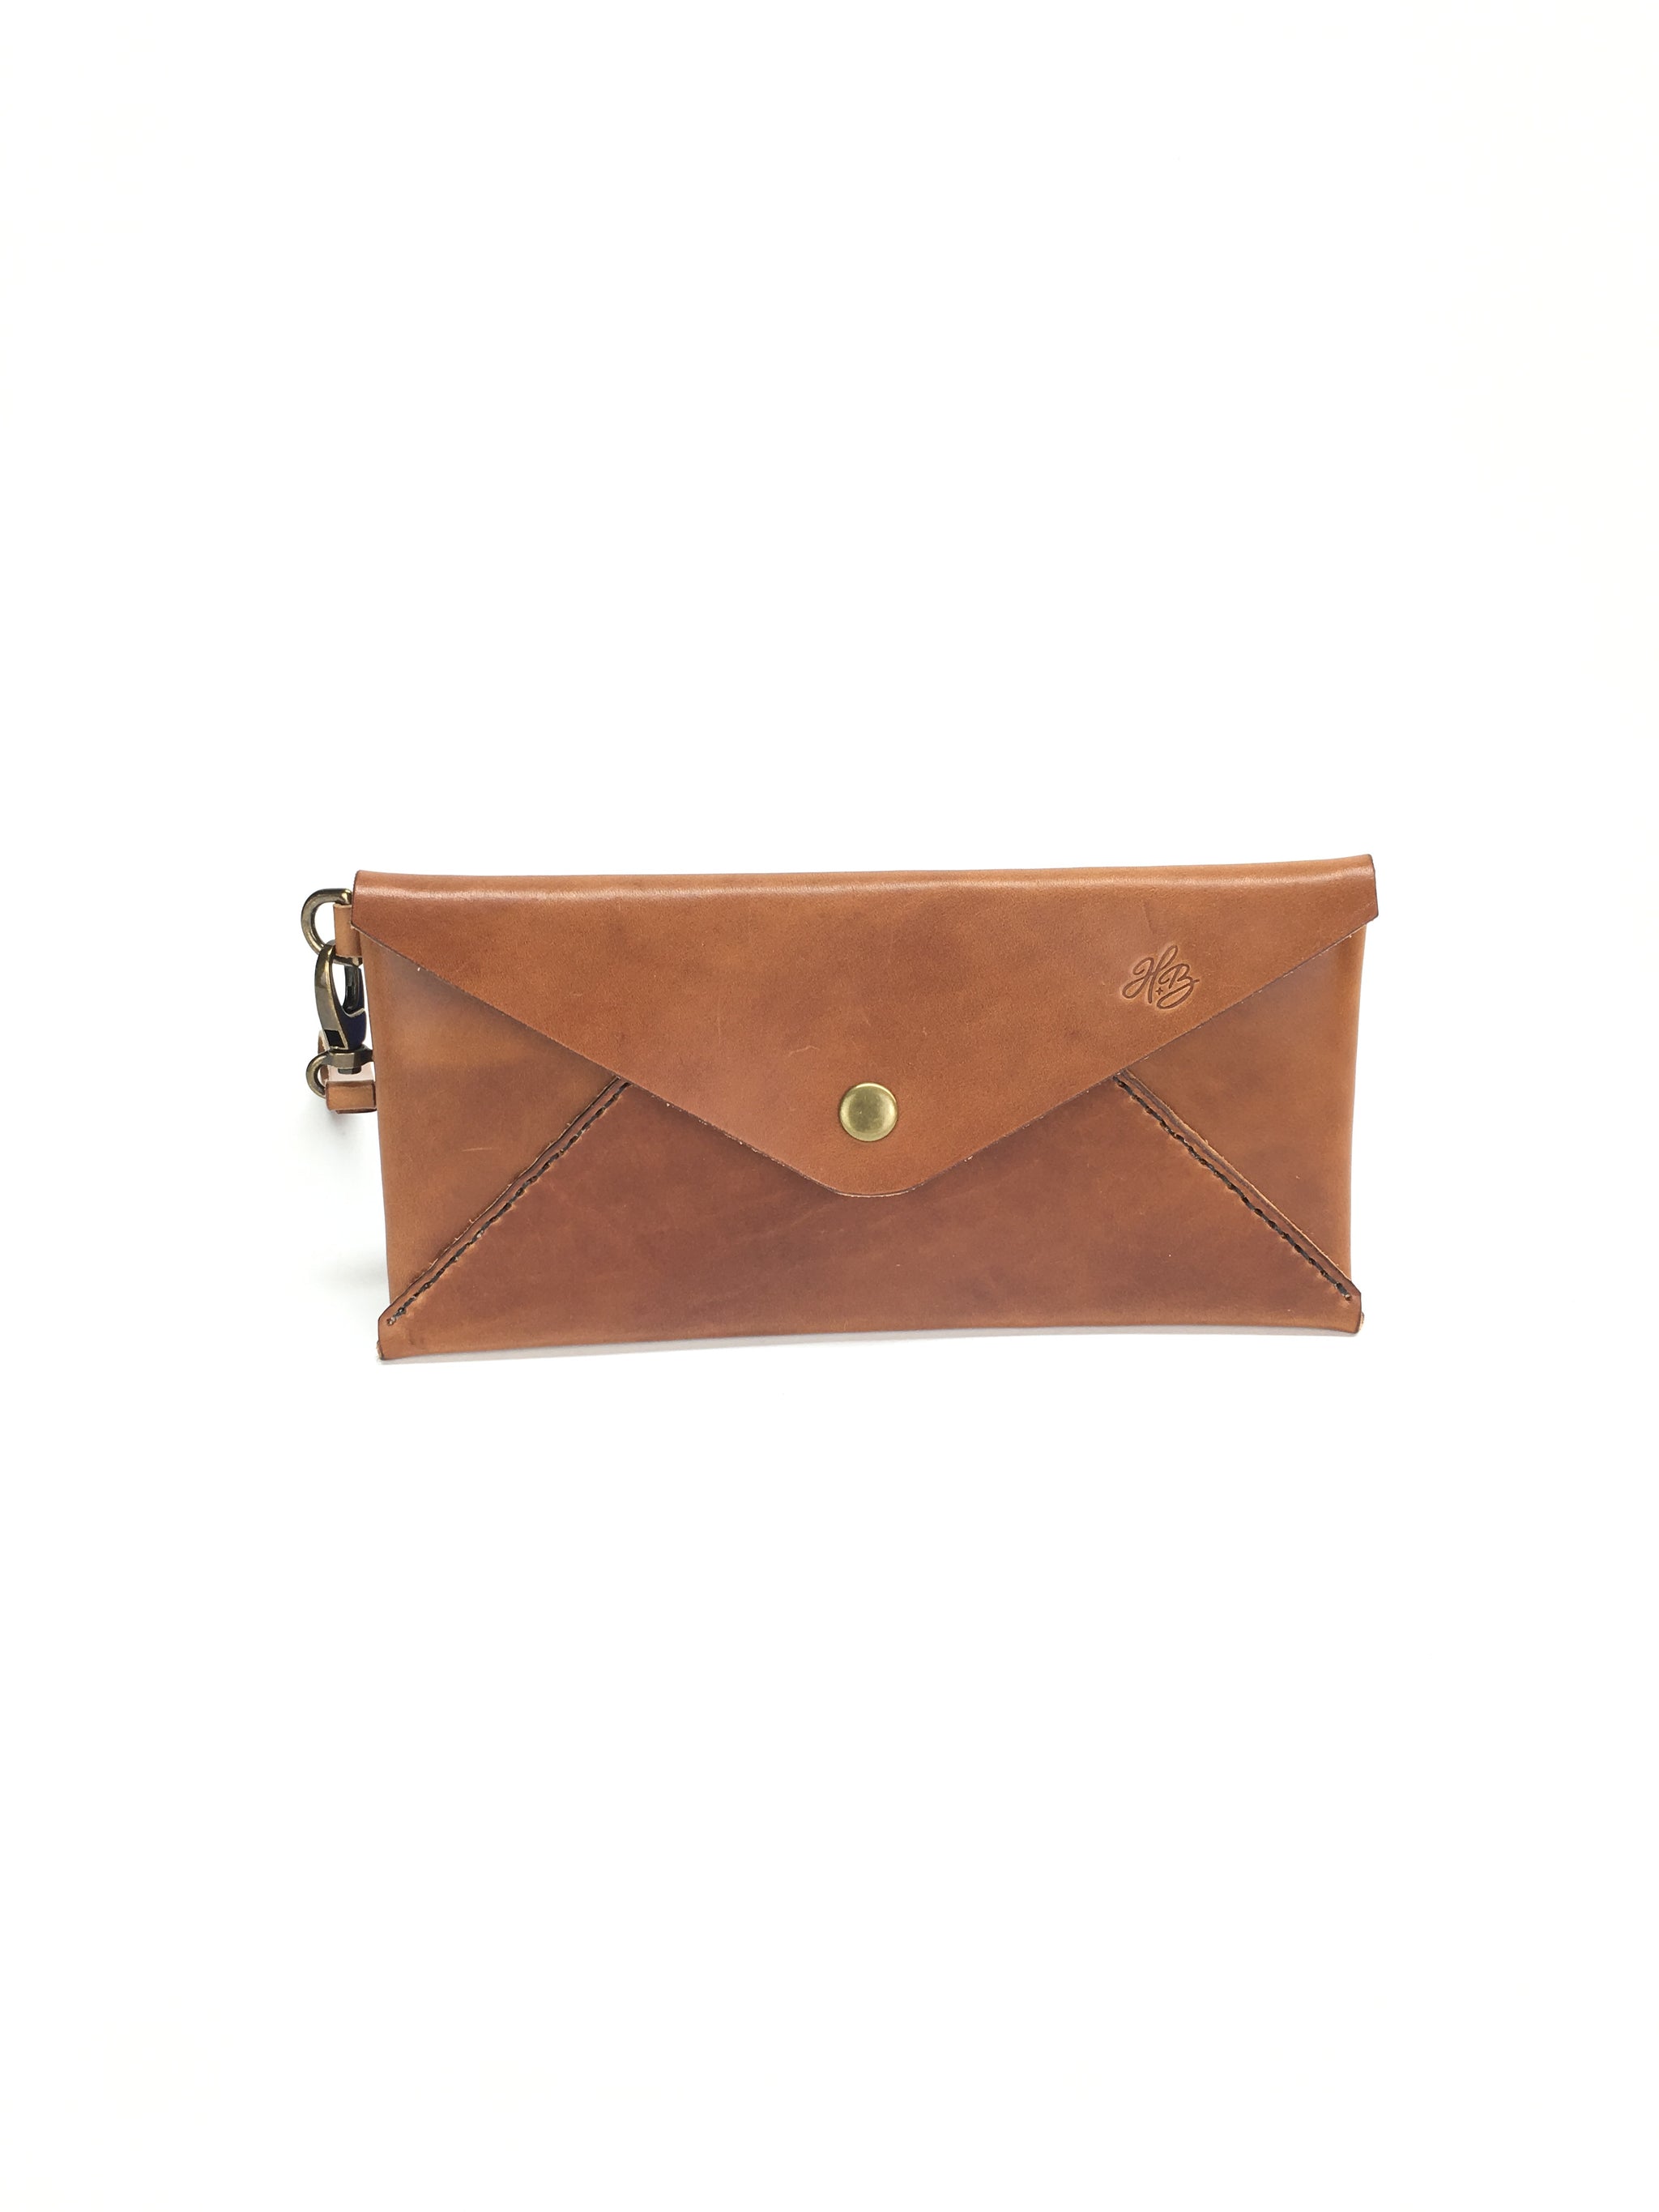 Leather clutch. Indian Leather Purse. Indian, Handmade, hand embossed. |  Brown leather handbags, Leather bag women, Leather clutch